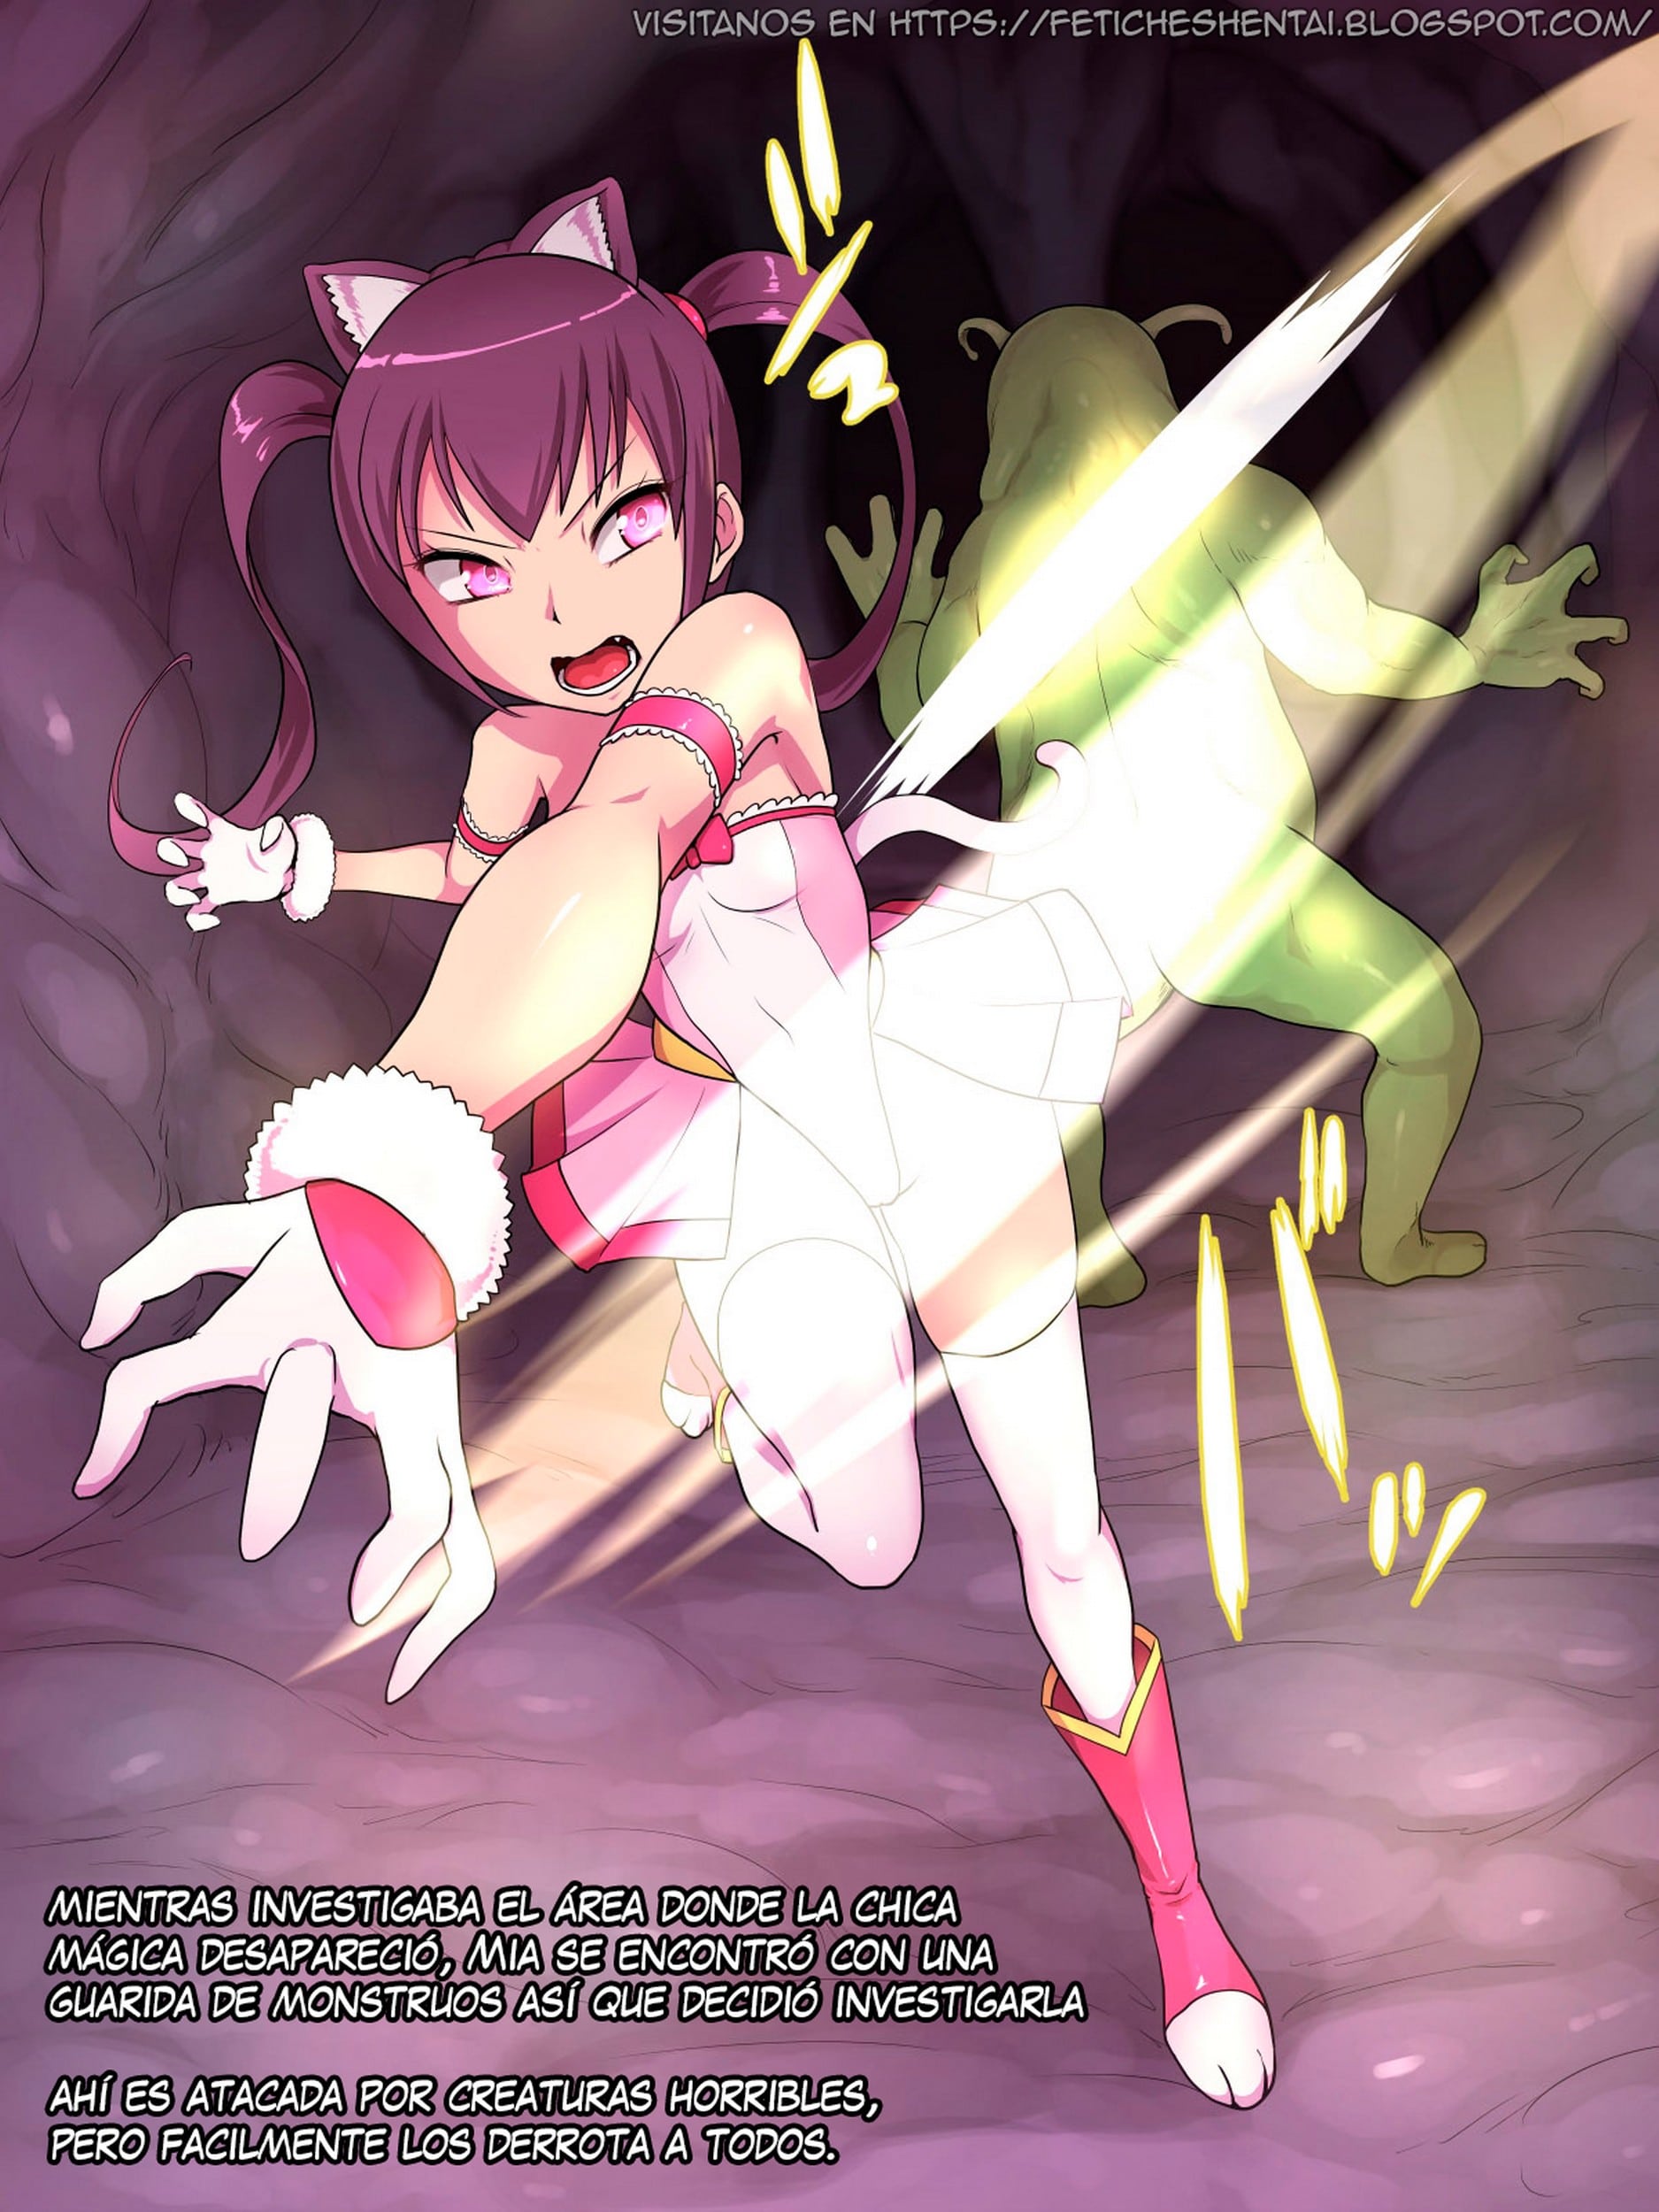 [Numeko] Mia, Magical Girl with Cat Ears vs Monsters with Tentacles - 0